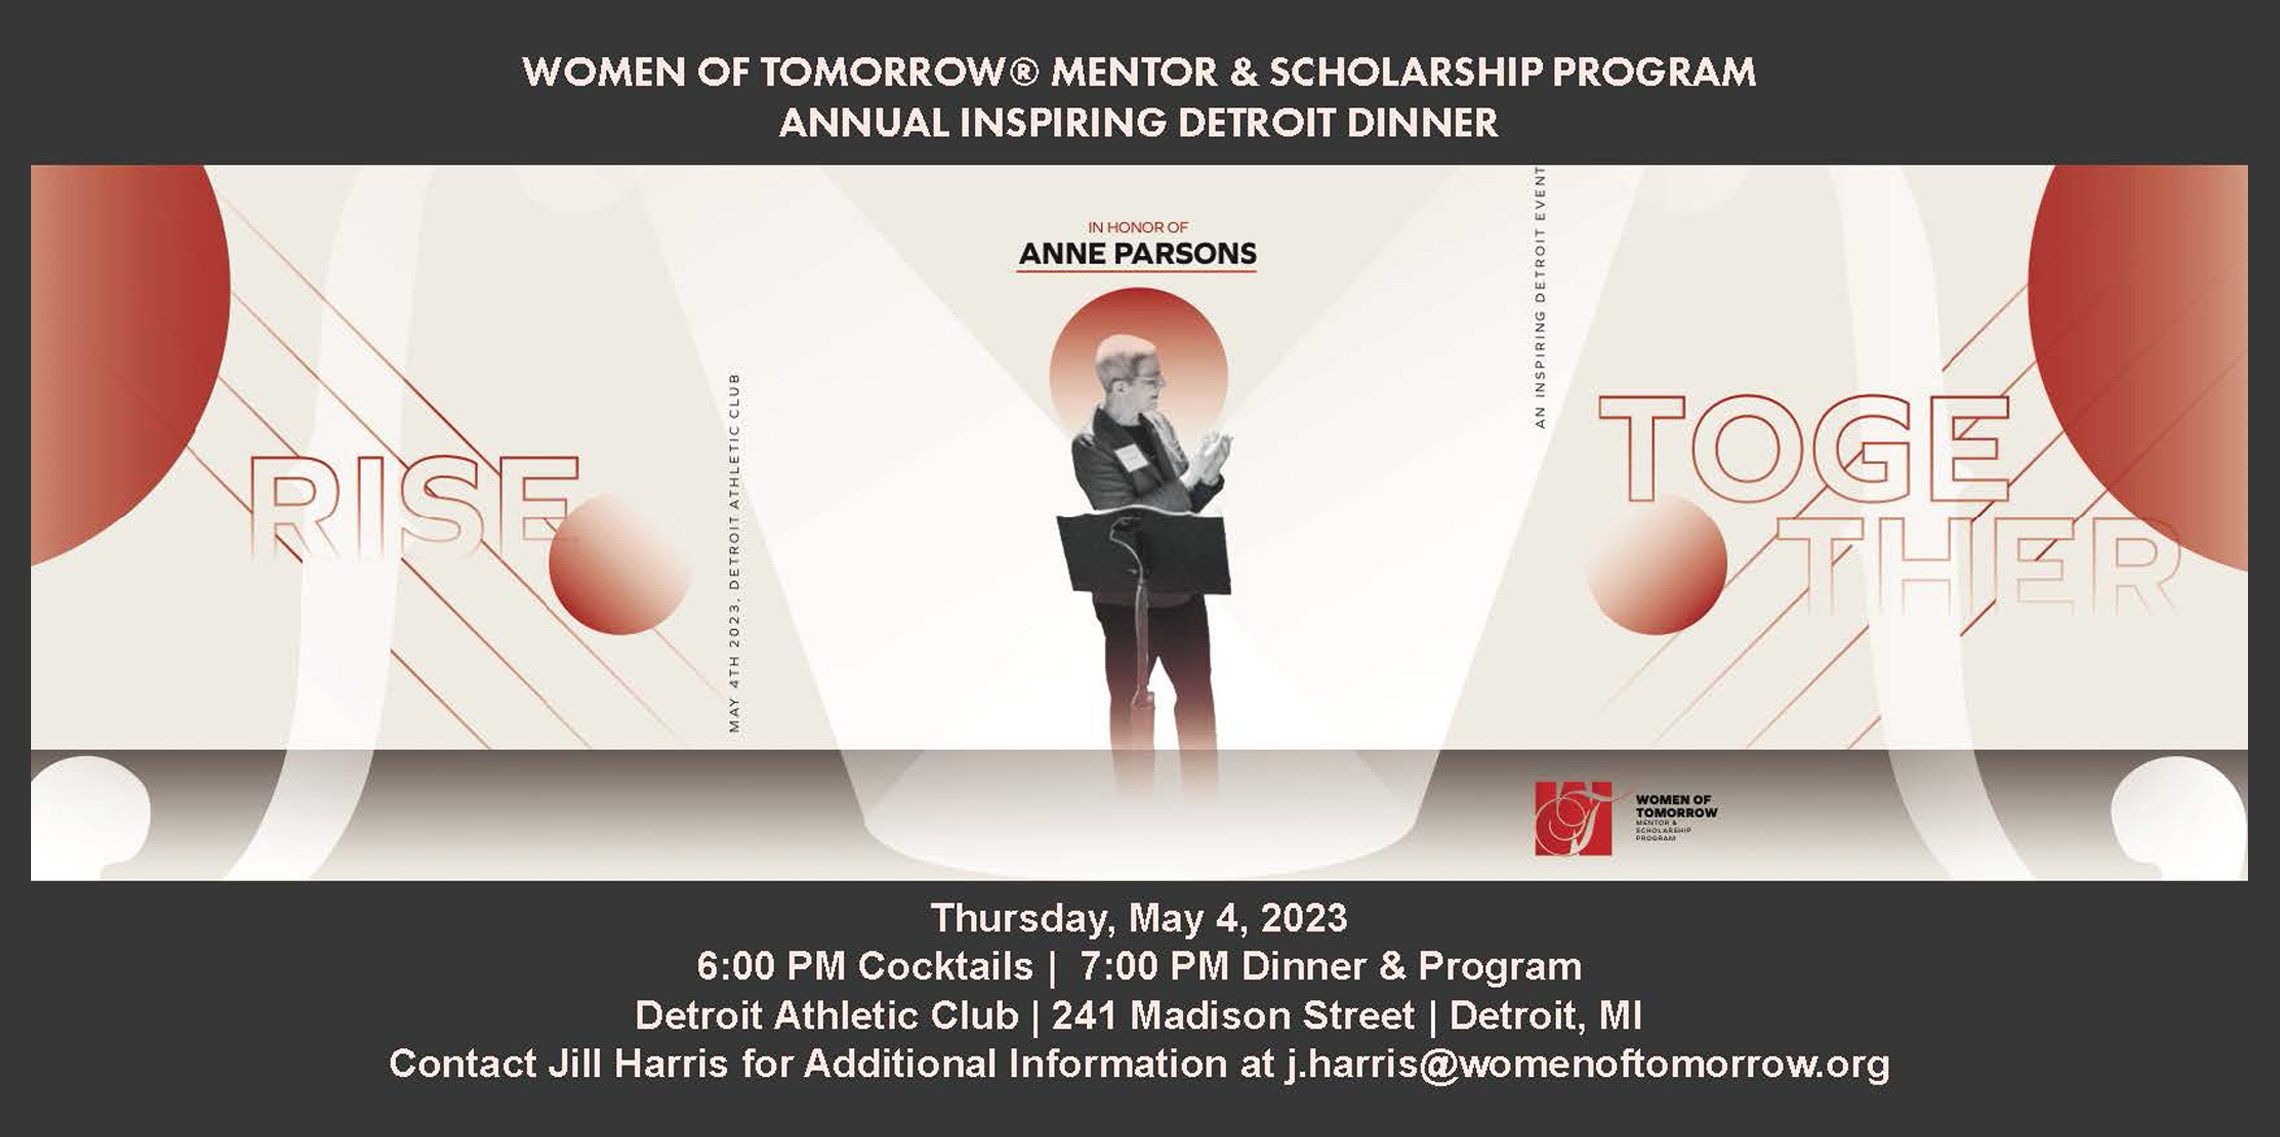 Women of Tomorrow Mentor and Scholarship Program: We invite you to Our Annual Inspiring Detroit Dinner 2023